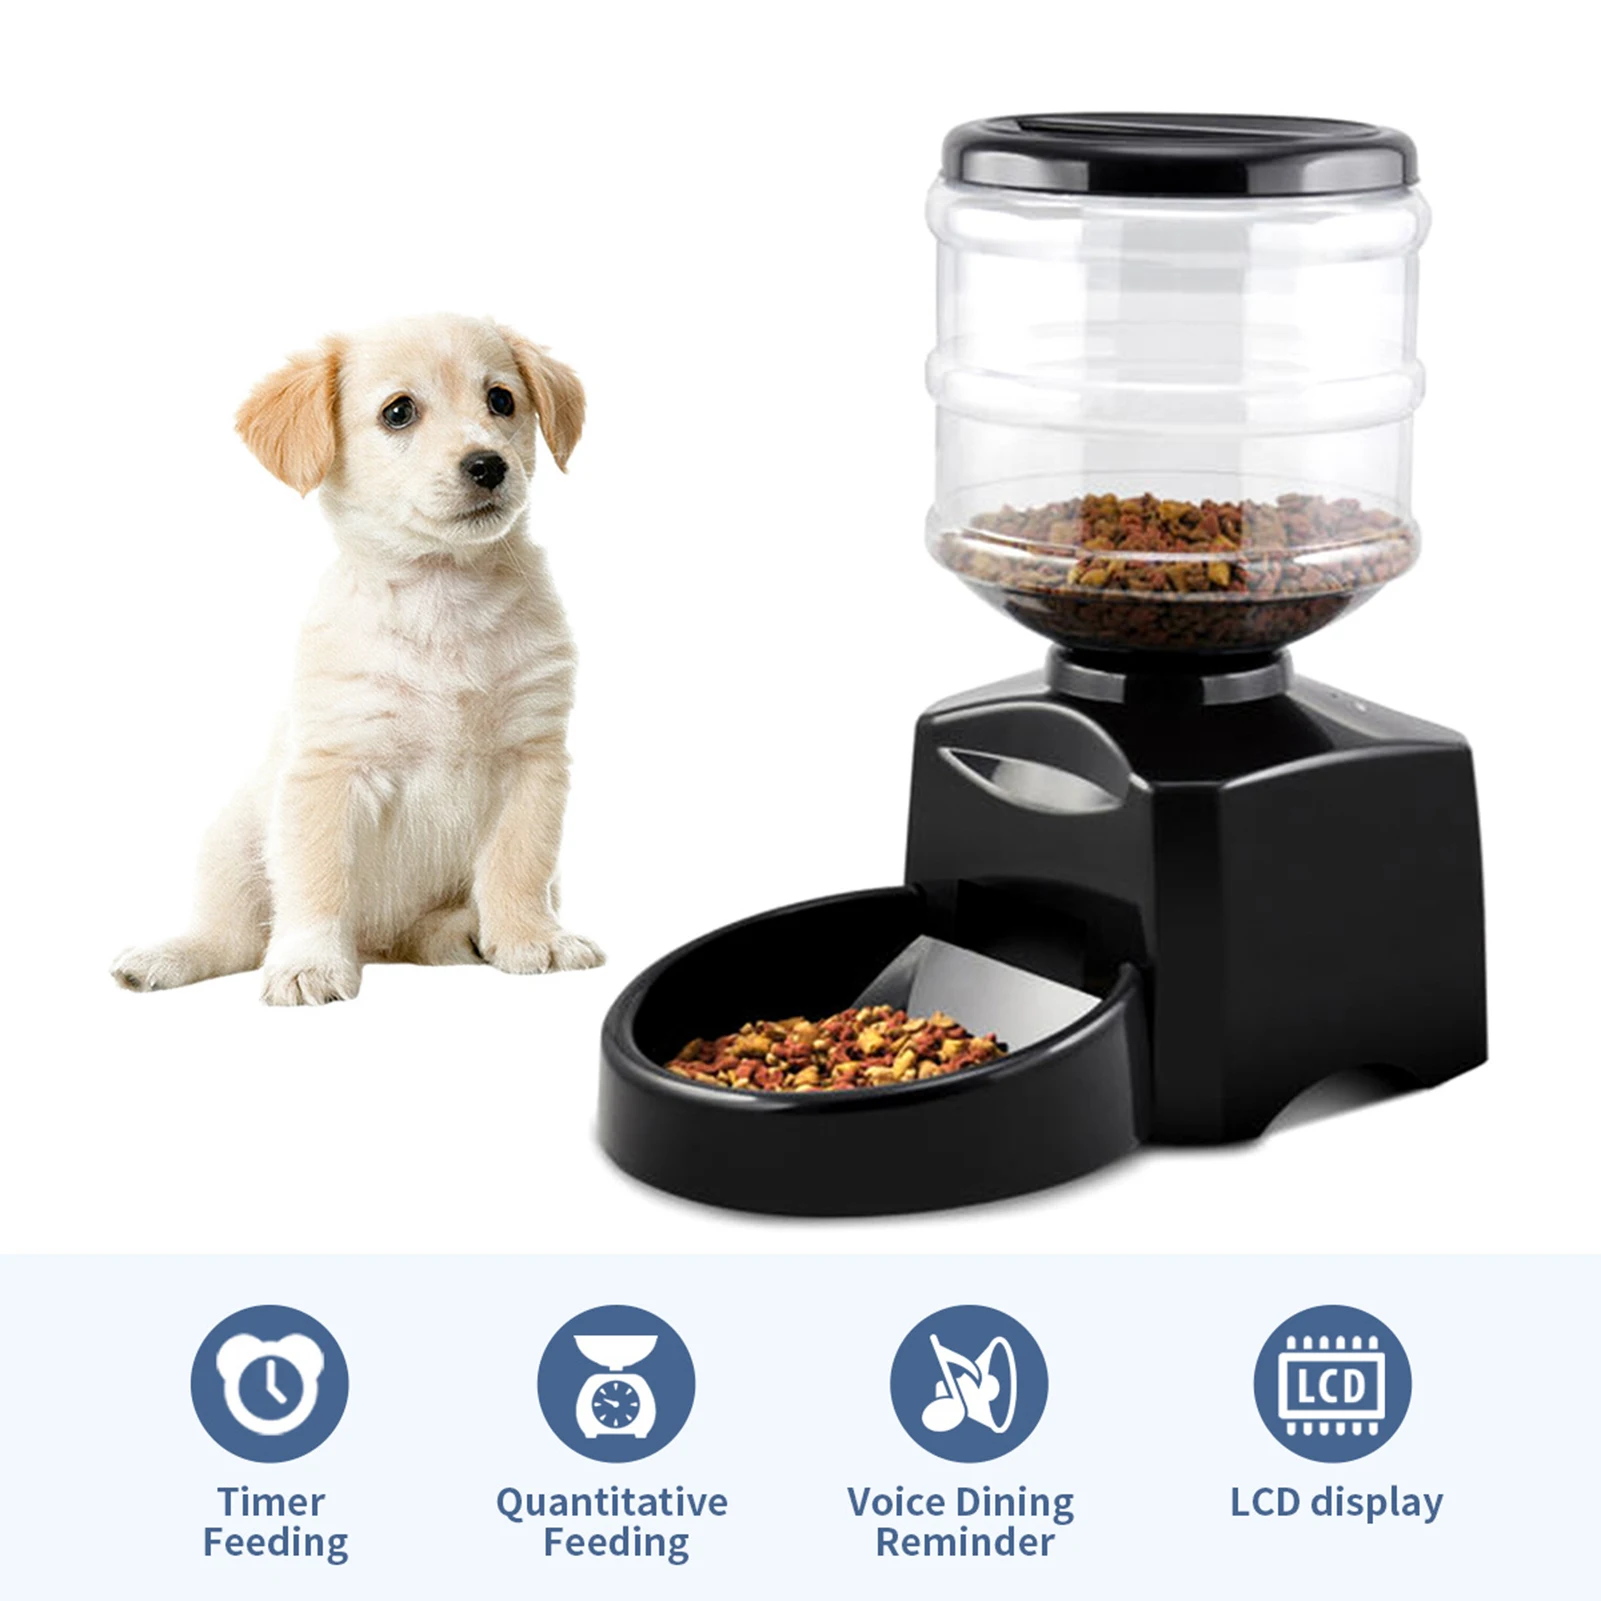 

Feeder Cat Automatic Food Dog Control 12 Pet Recorder Smart Bowl Timed Portion Voice Feeding Meal 1-3 Pet Dispenser Programmable